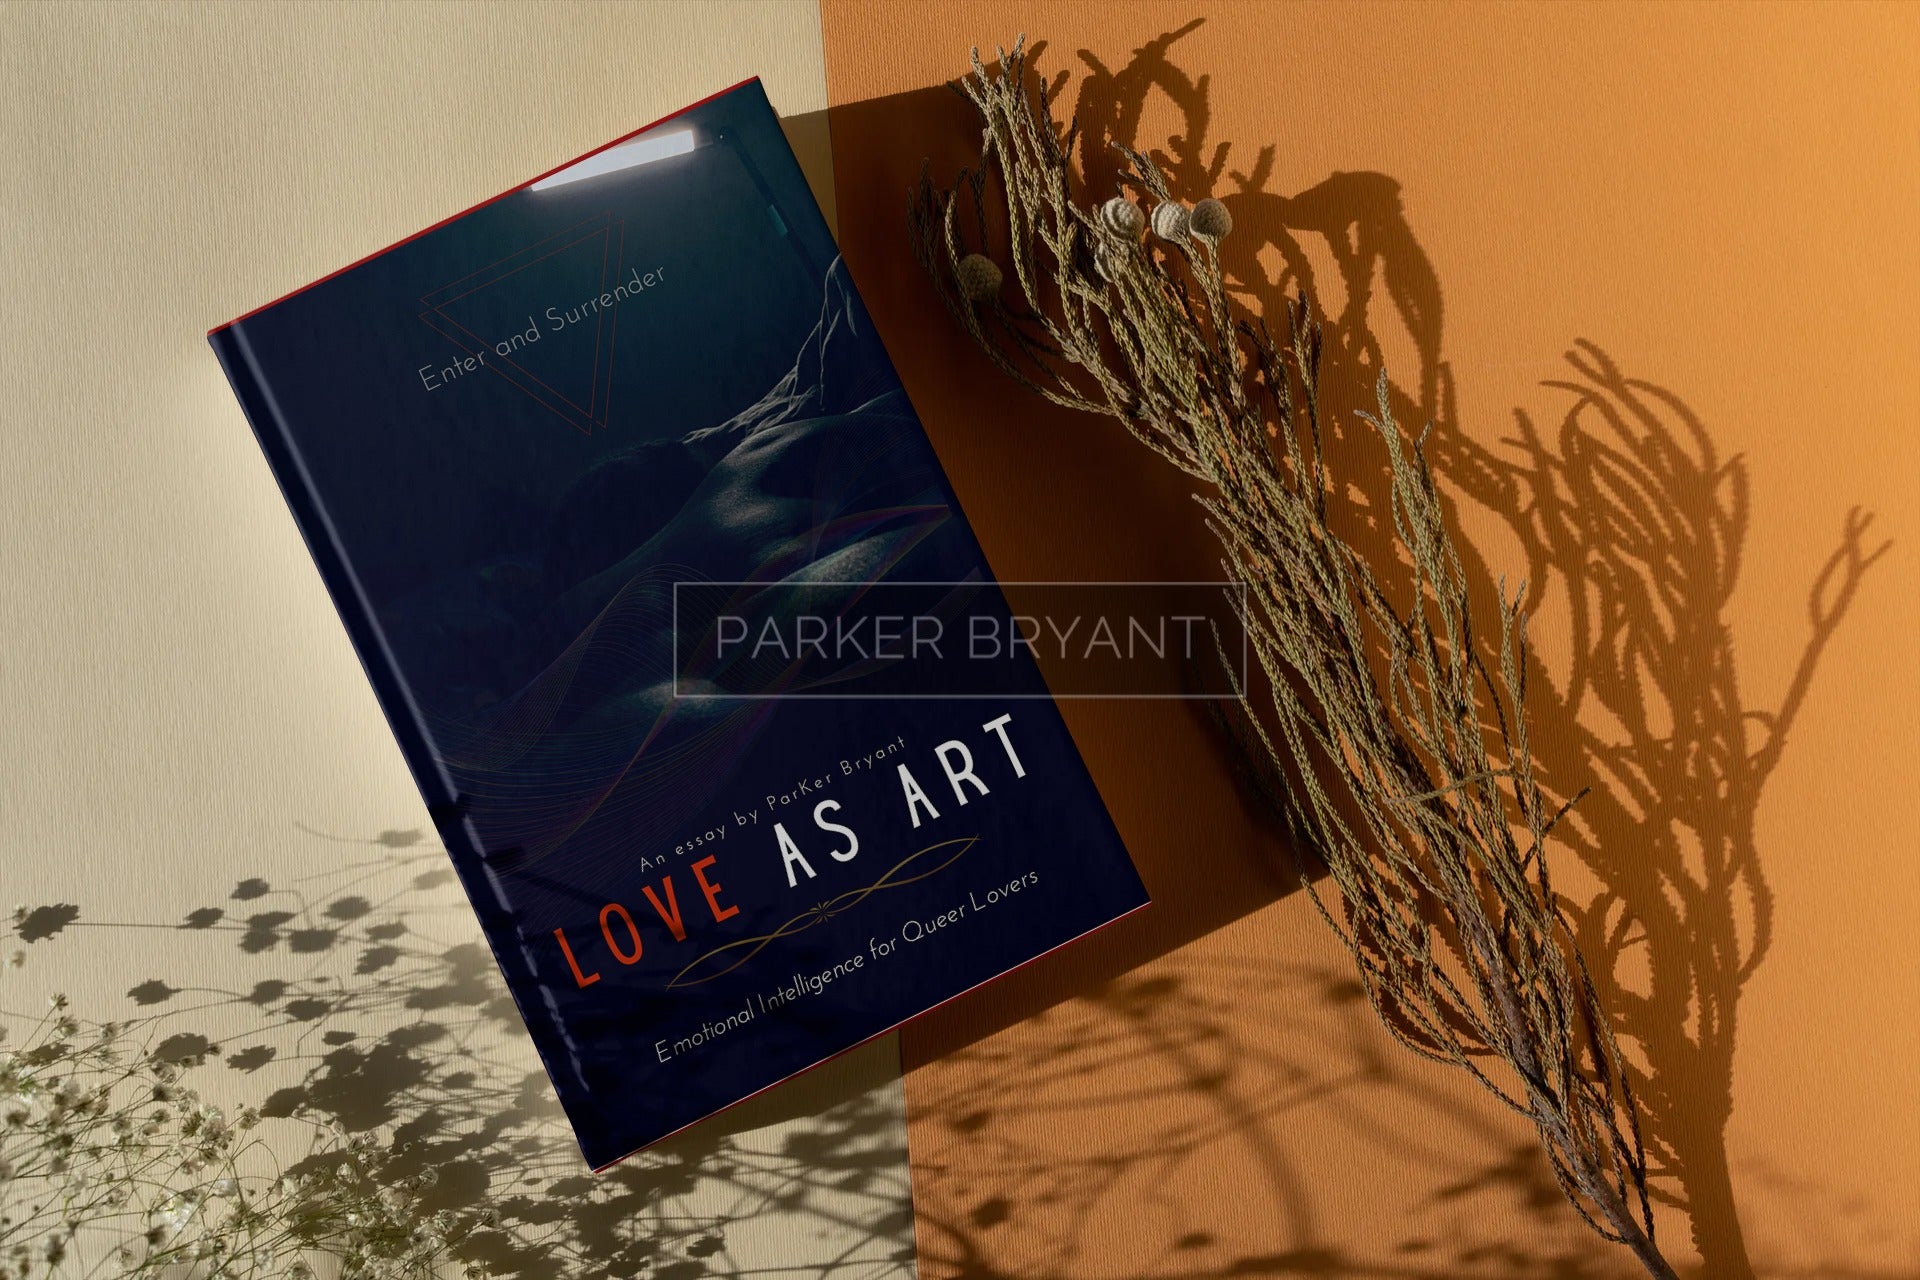 Love As Art: Emotional Intelligence for Queer Lovers is a Game Changer